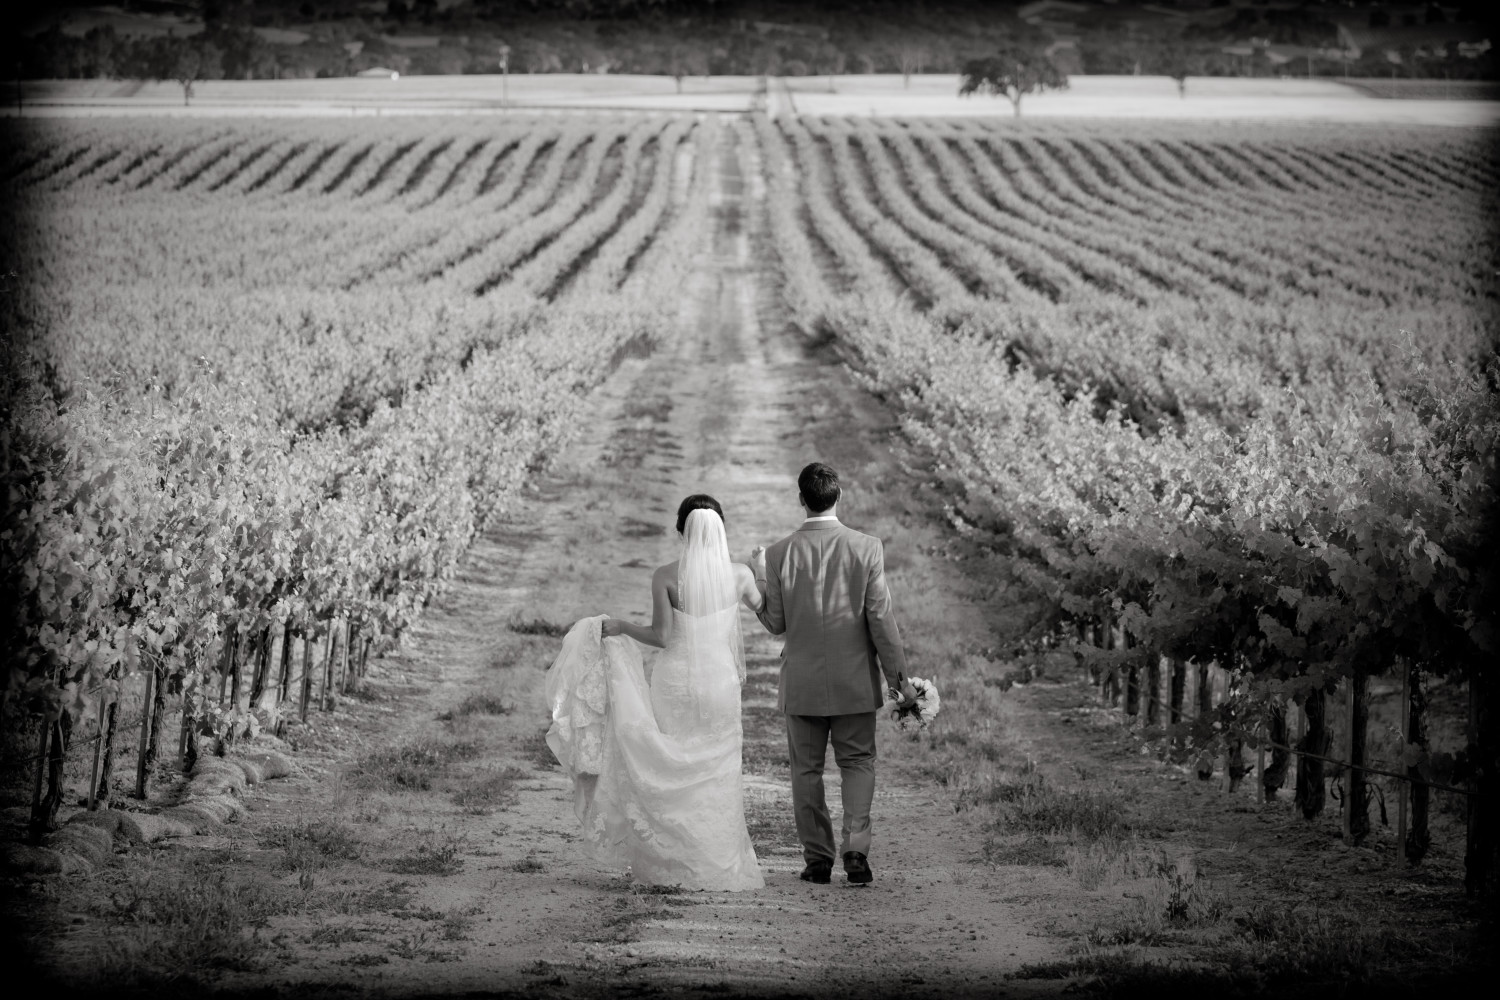 A final portrait of the wedding couple in the vineyard